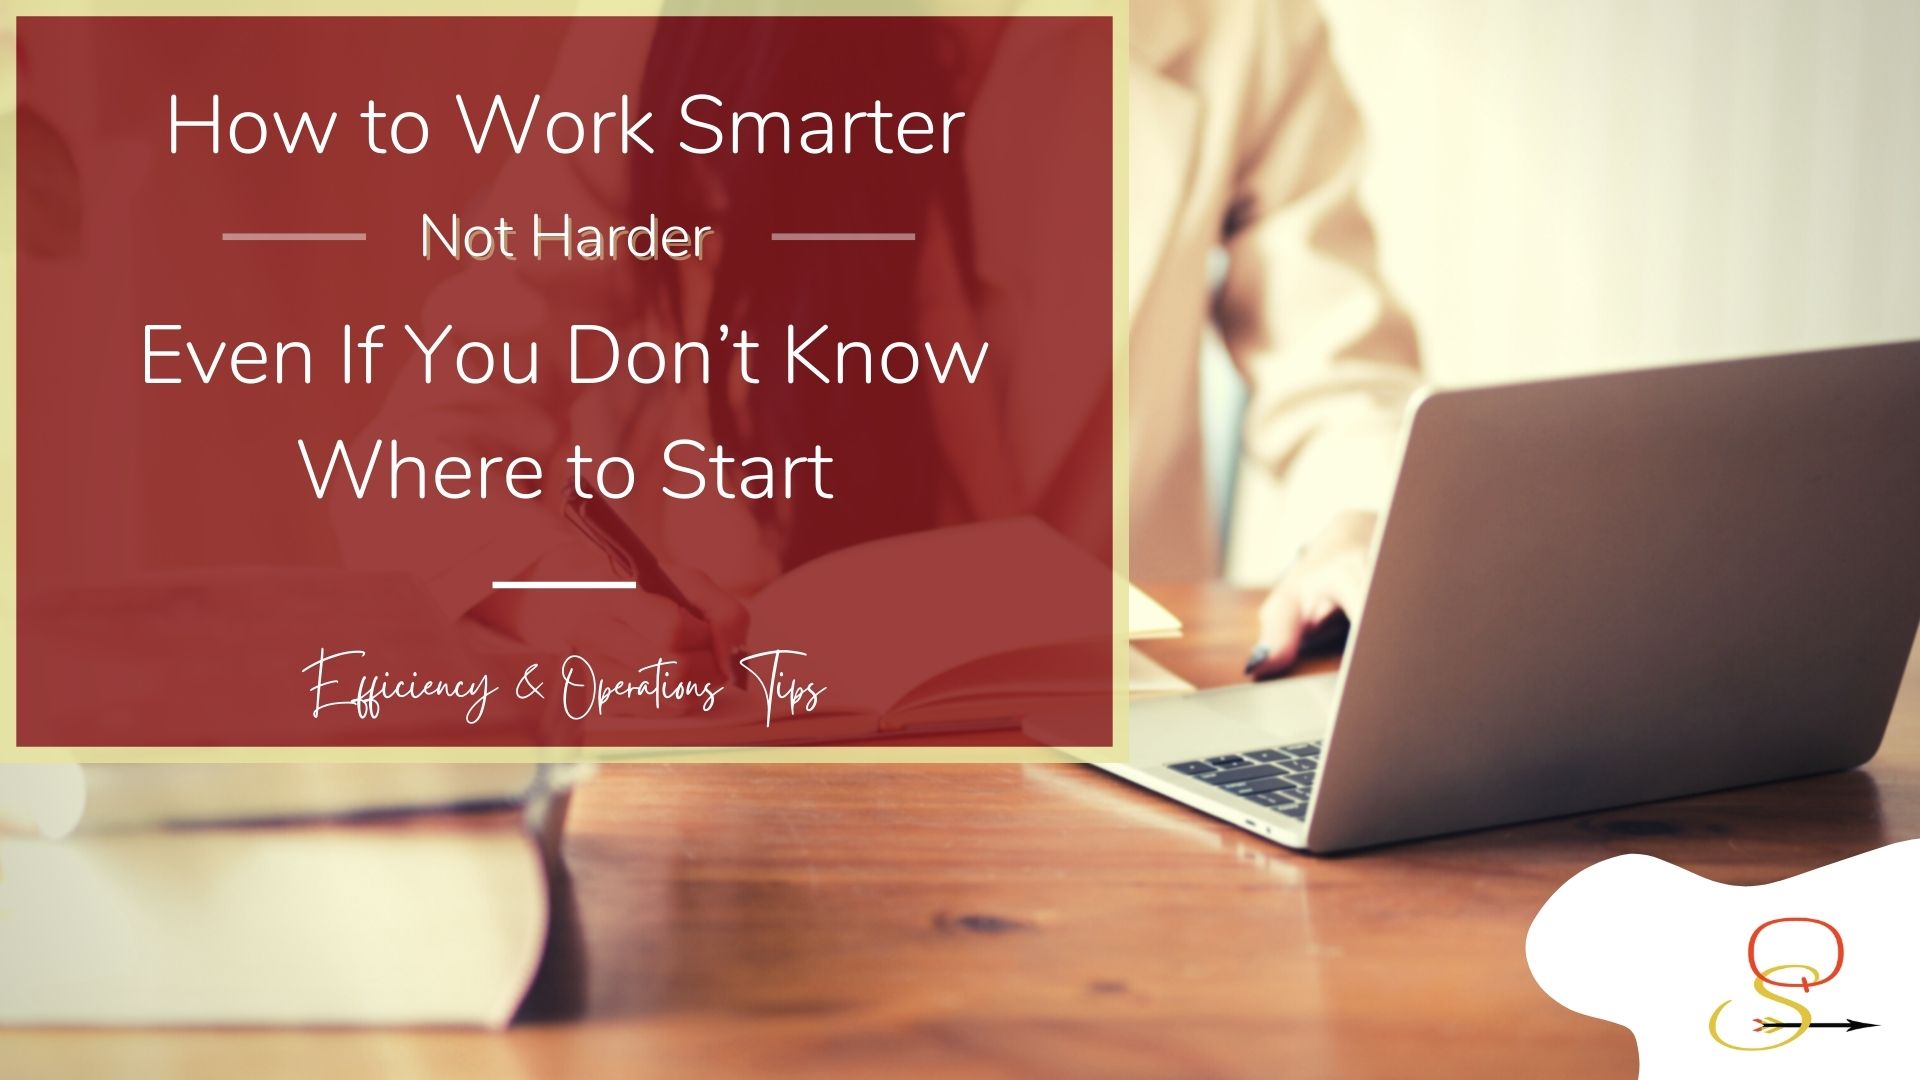 How to Work Smarter, Not Harder, Even If You Don’t Know Where to Start